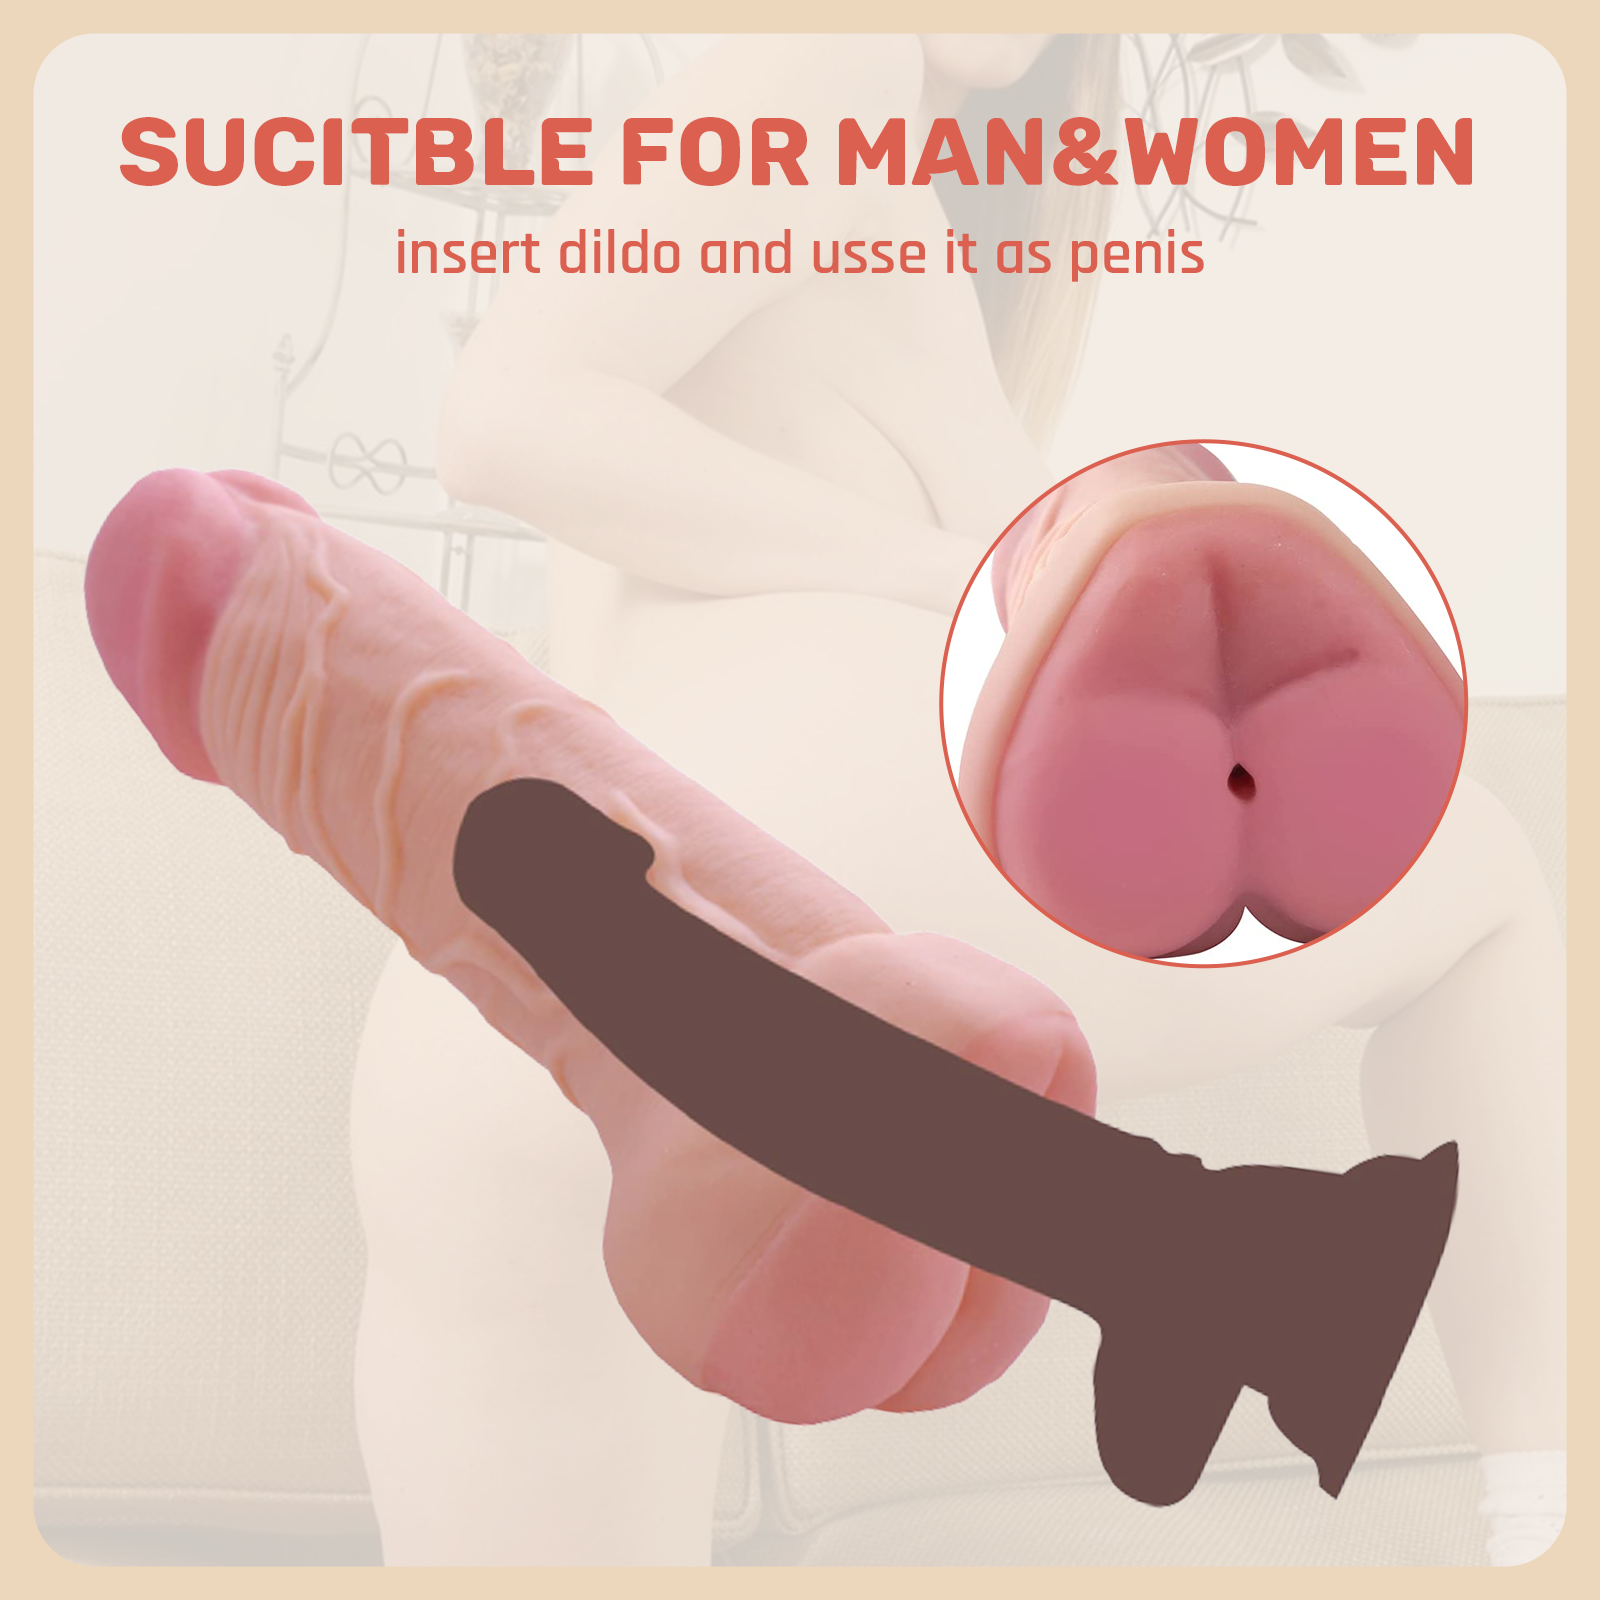 The most realistic giant dildo to stimulate your anus